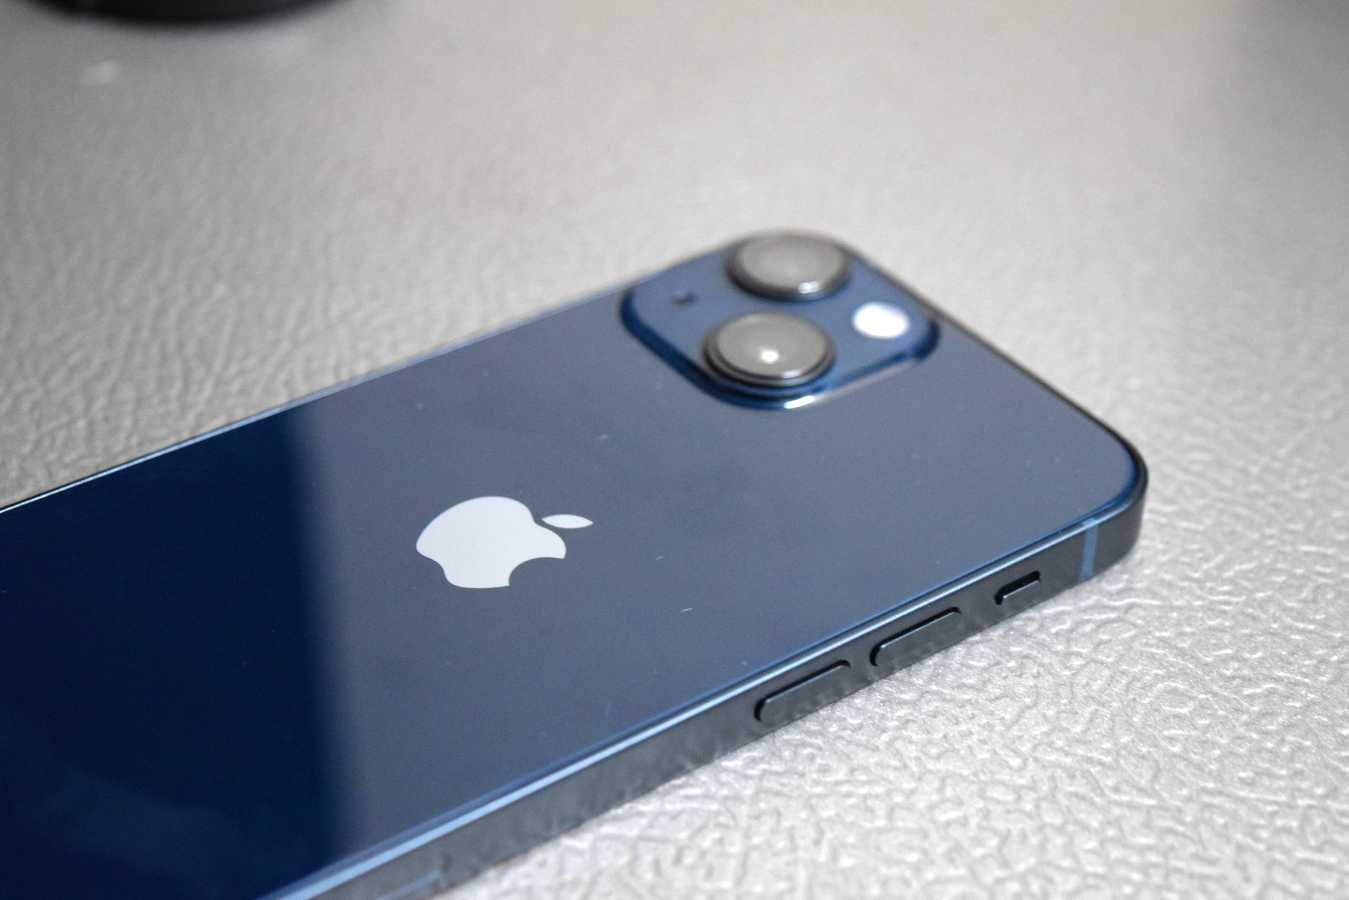 The End of Compact Phones: iPhone 13 Mini To be Discontinued